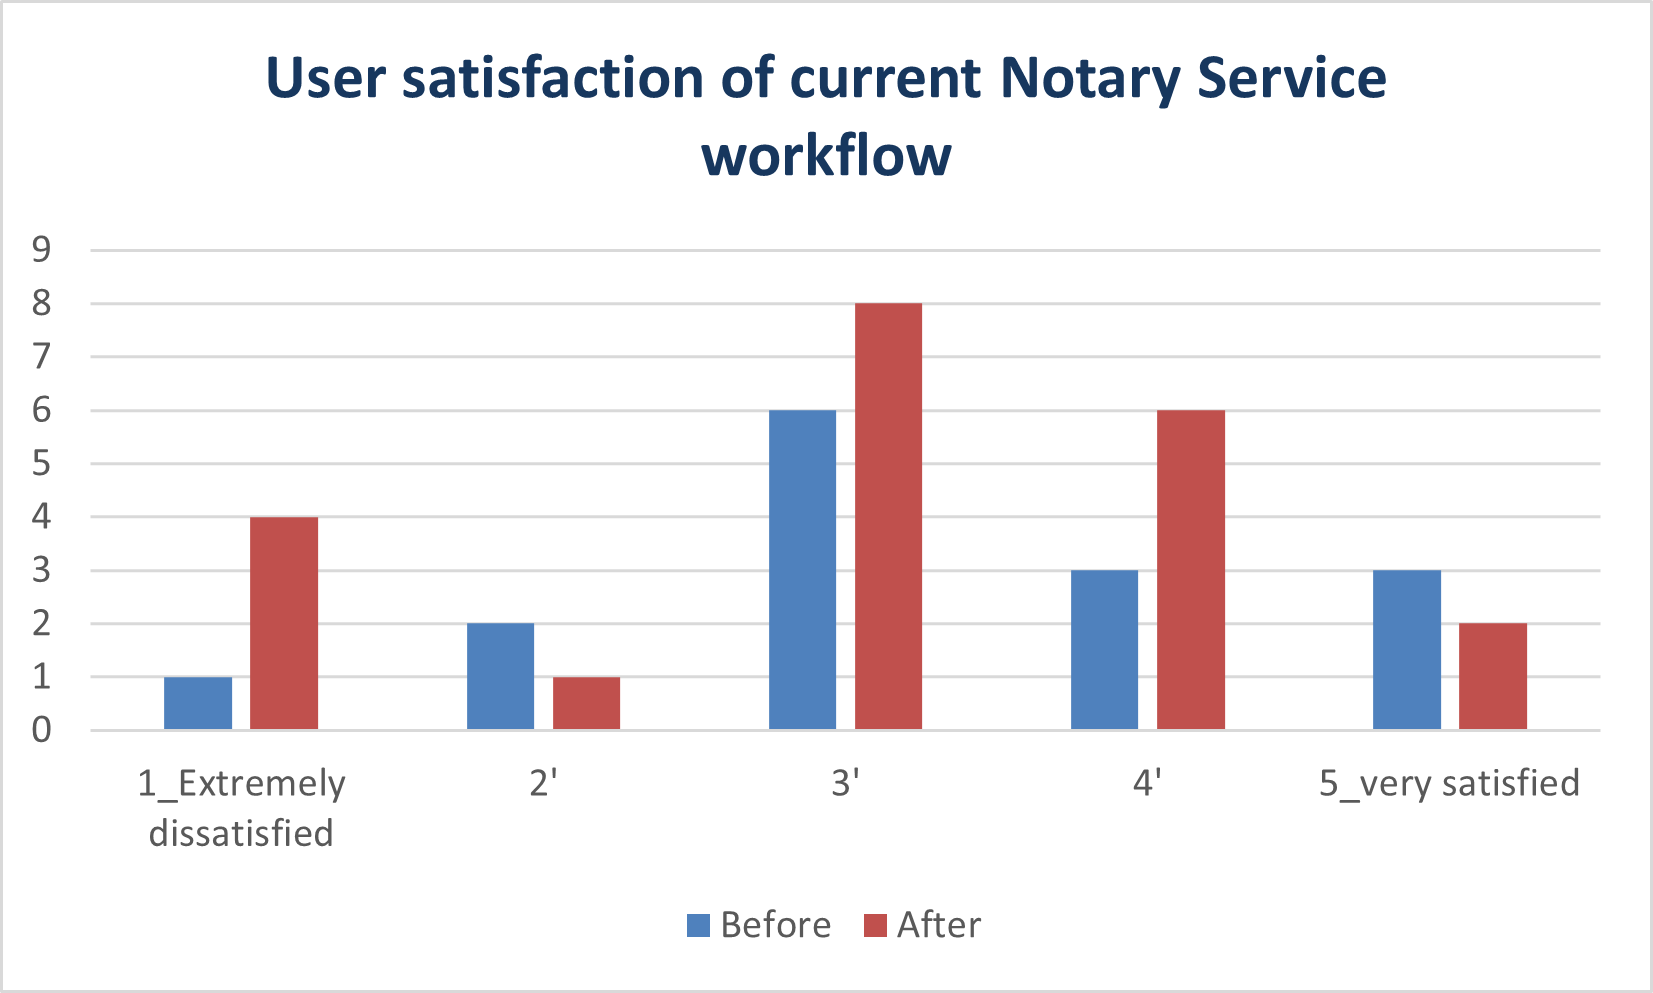 Pre-post  survey results showing user´s perception of workflow satisfaction